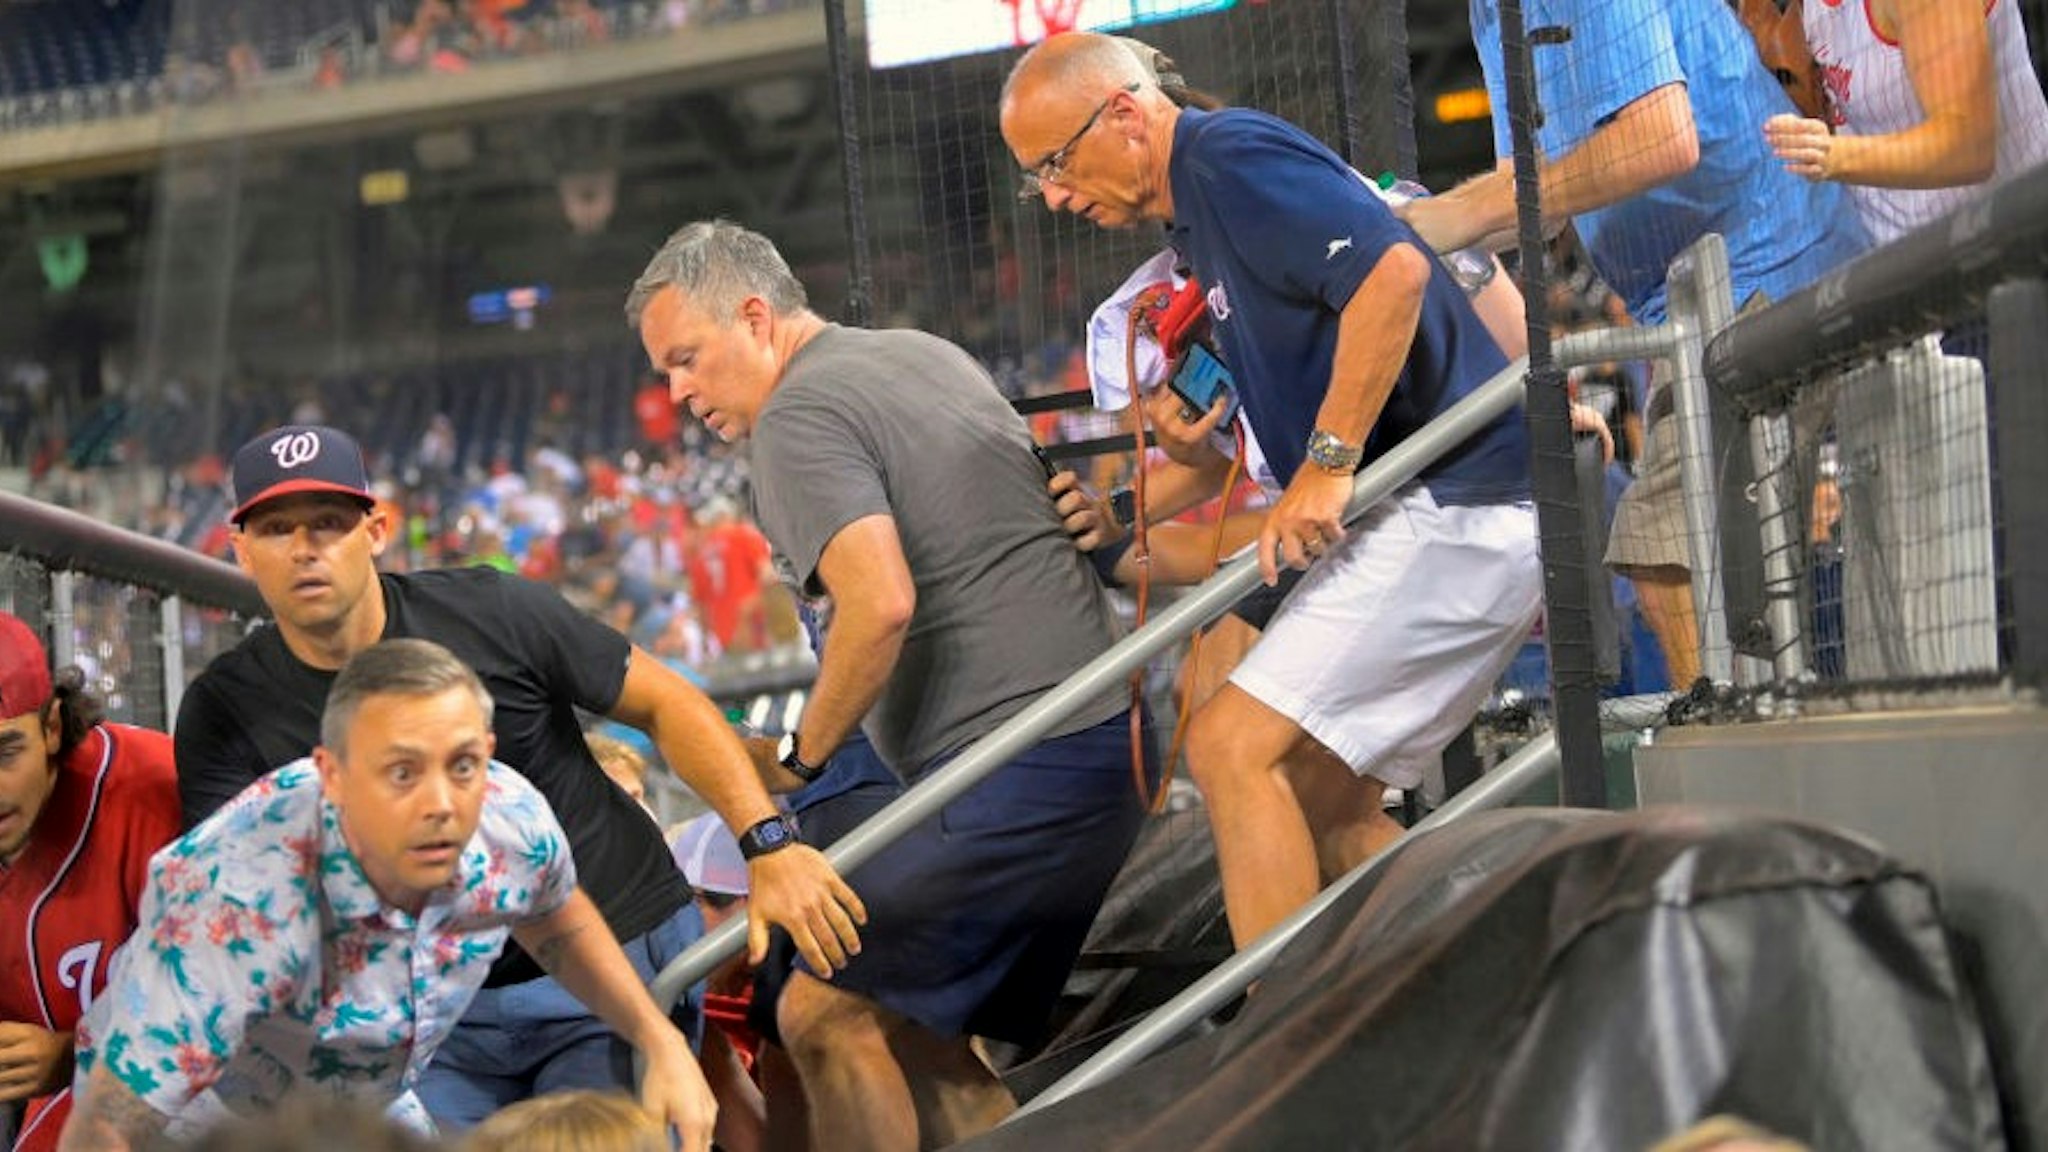 WASHINGTON, DC- JULY 17: Fans rush to evacuate after hearing during a game between a the San Diego Padres and the Washington Nationals at Nationals Park in Washington, DC on July 17, 2021. (Photo by